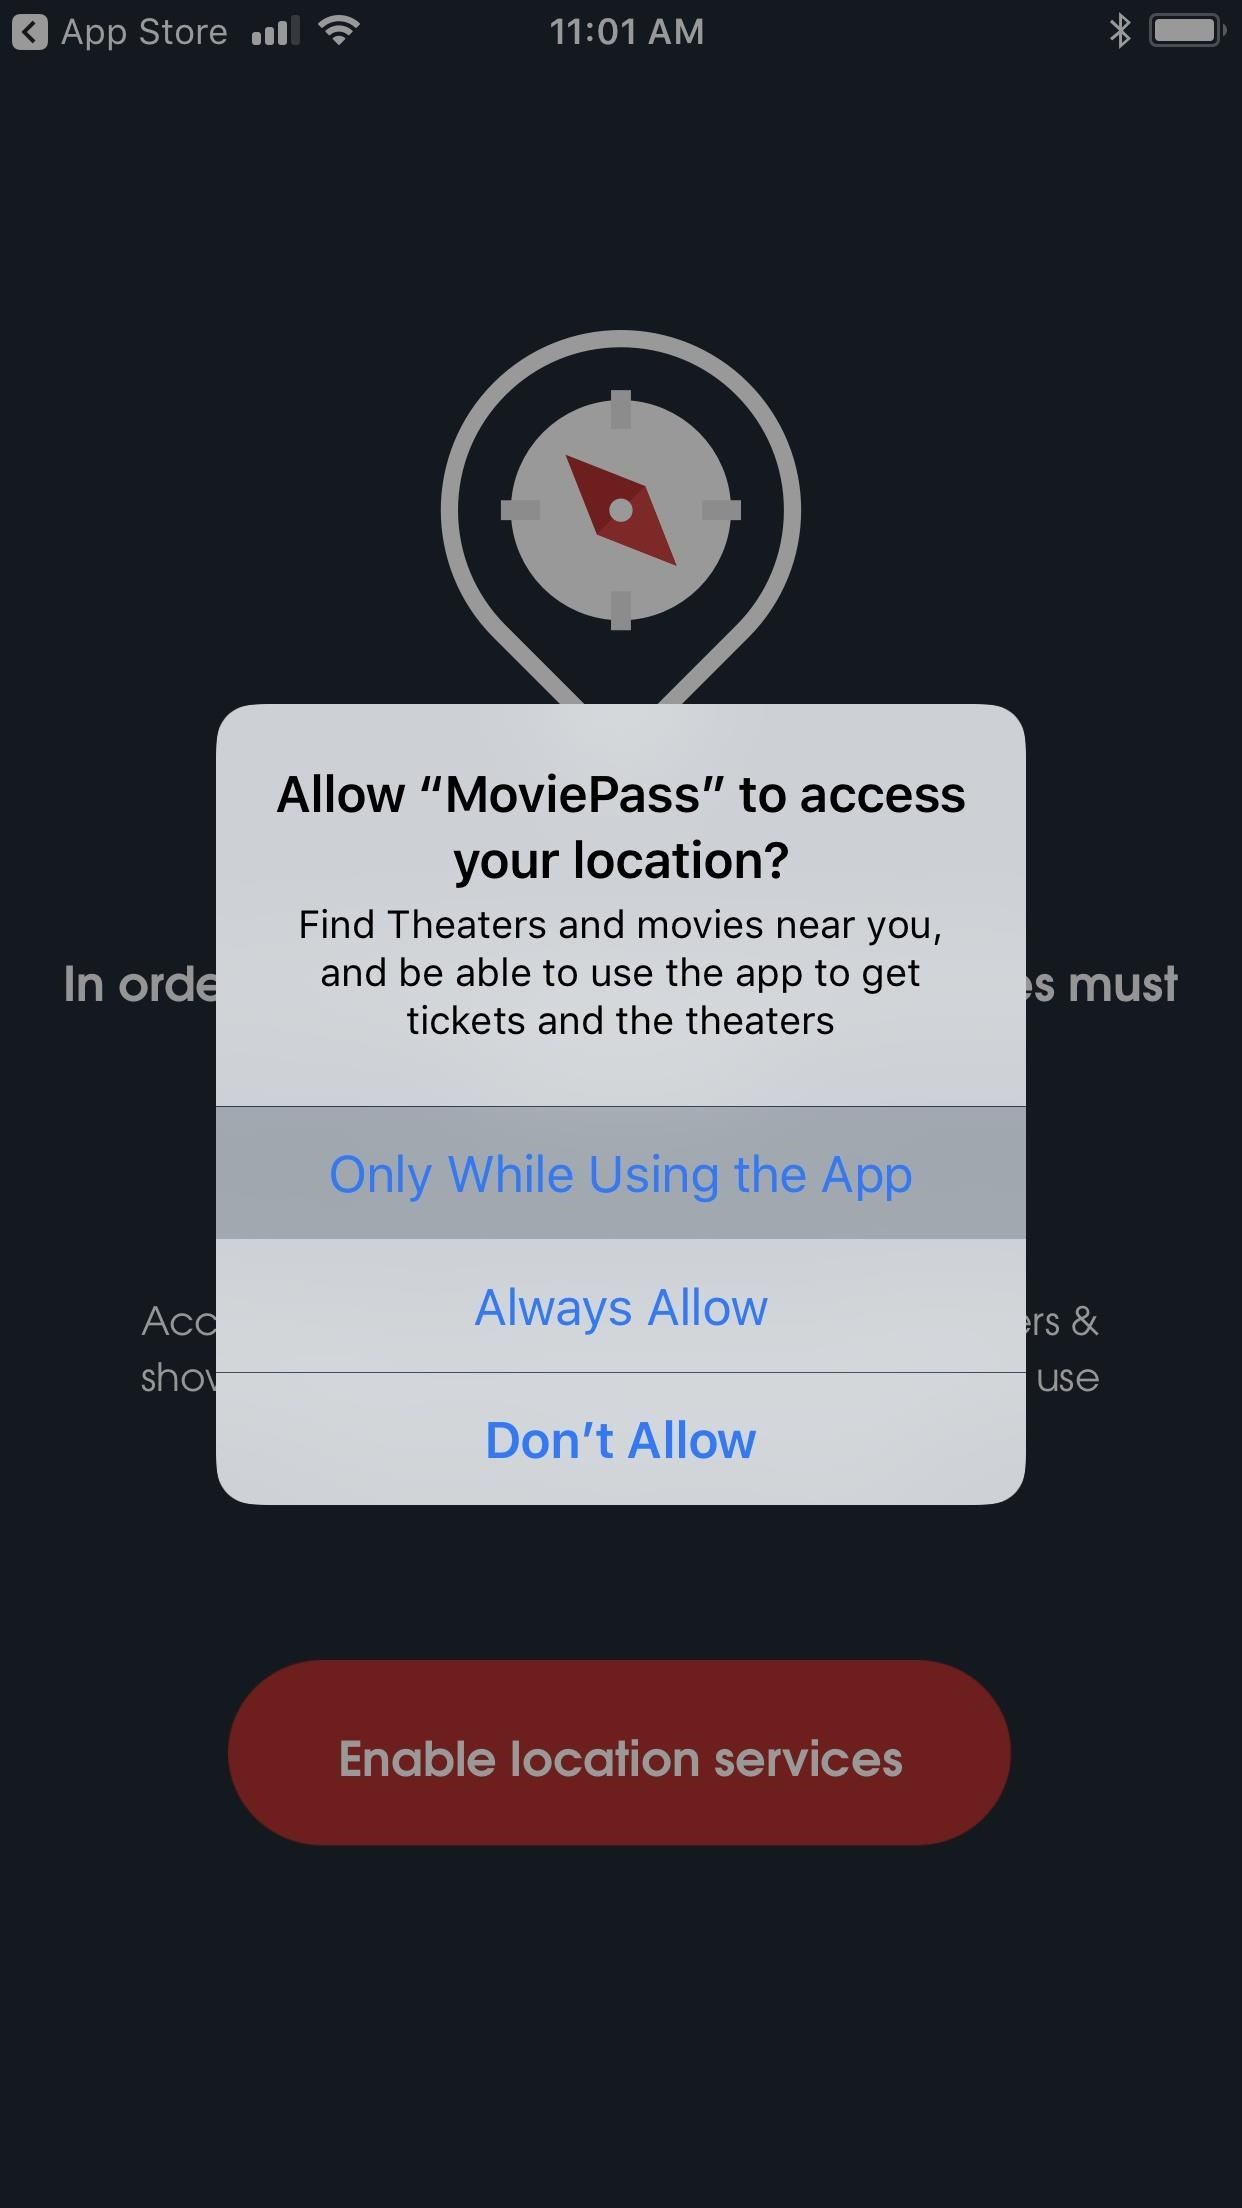 There's an Easy Way to Stop MoviePass from Tracking Your iPhone After Watching Films